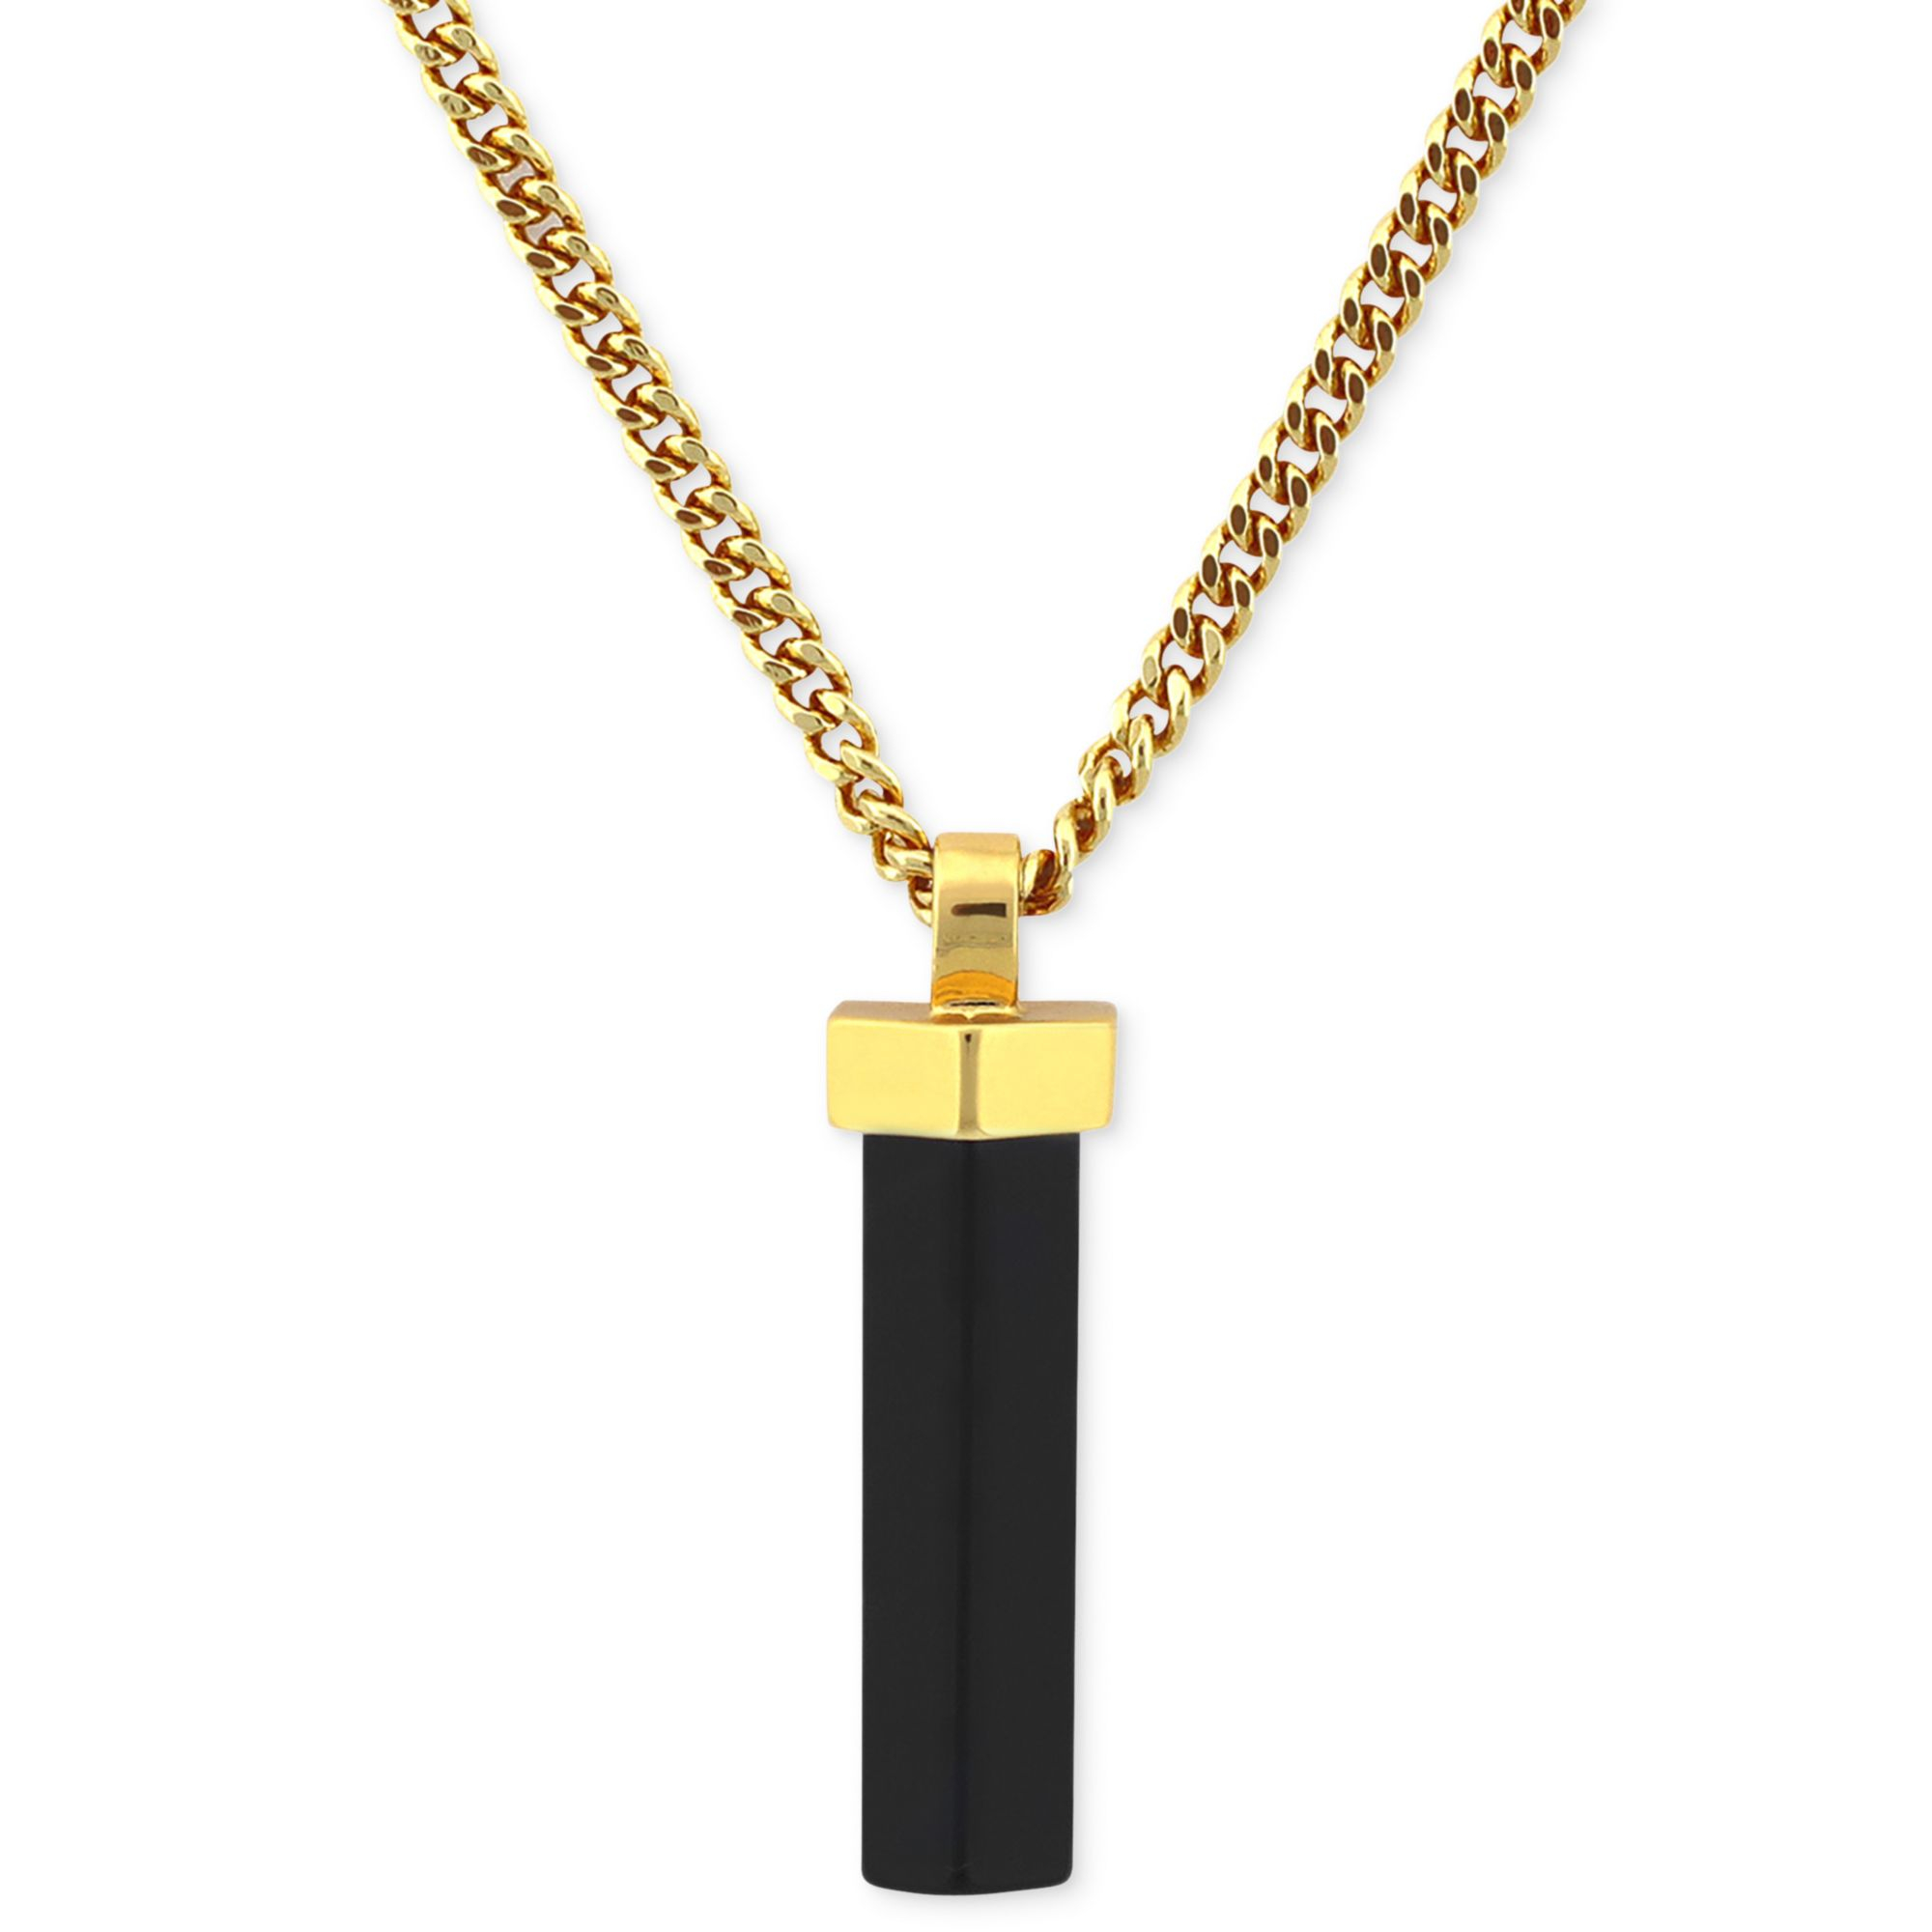 Lyst - Vince Camuto Goldtone Black Onyx Stone Pendant Necklace in Black